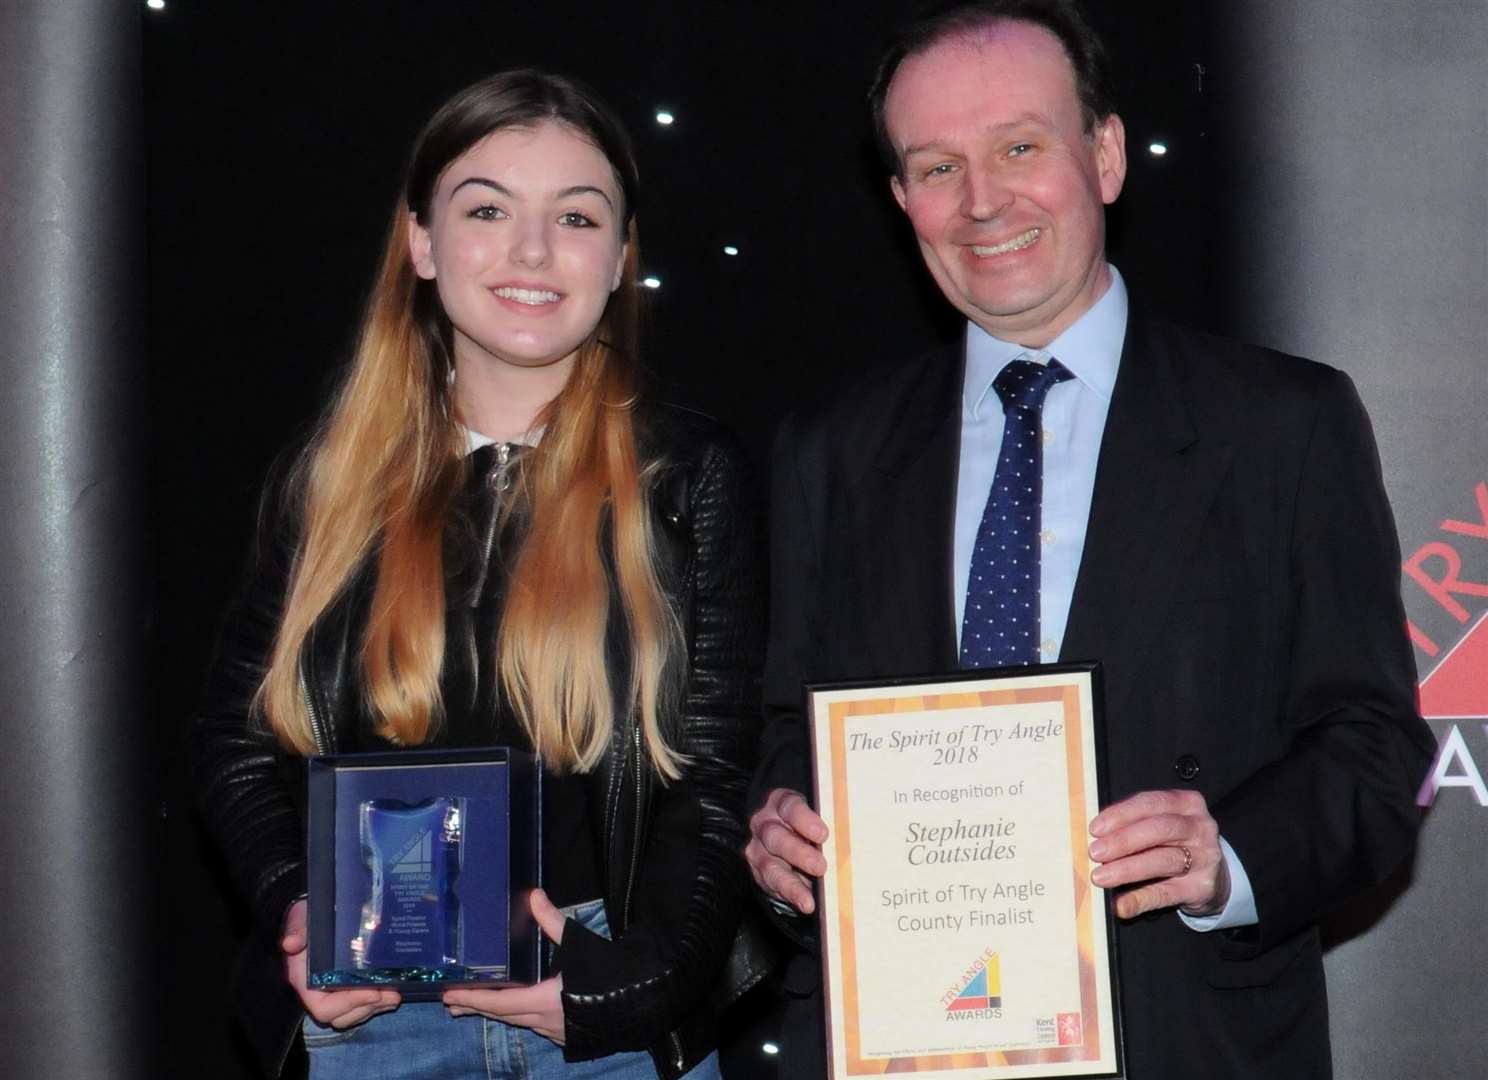 Stephanie Coutsides received her award in the Good Friend and Young Carer category from Cllr Roger Gough